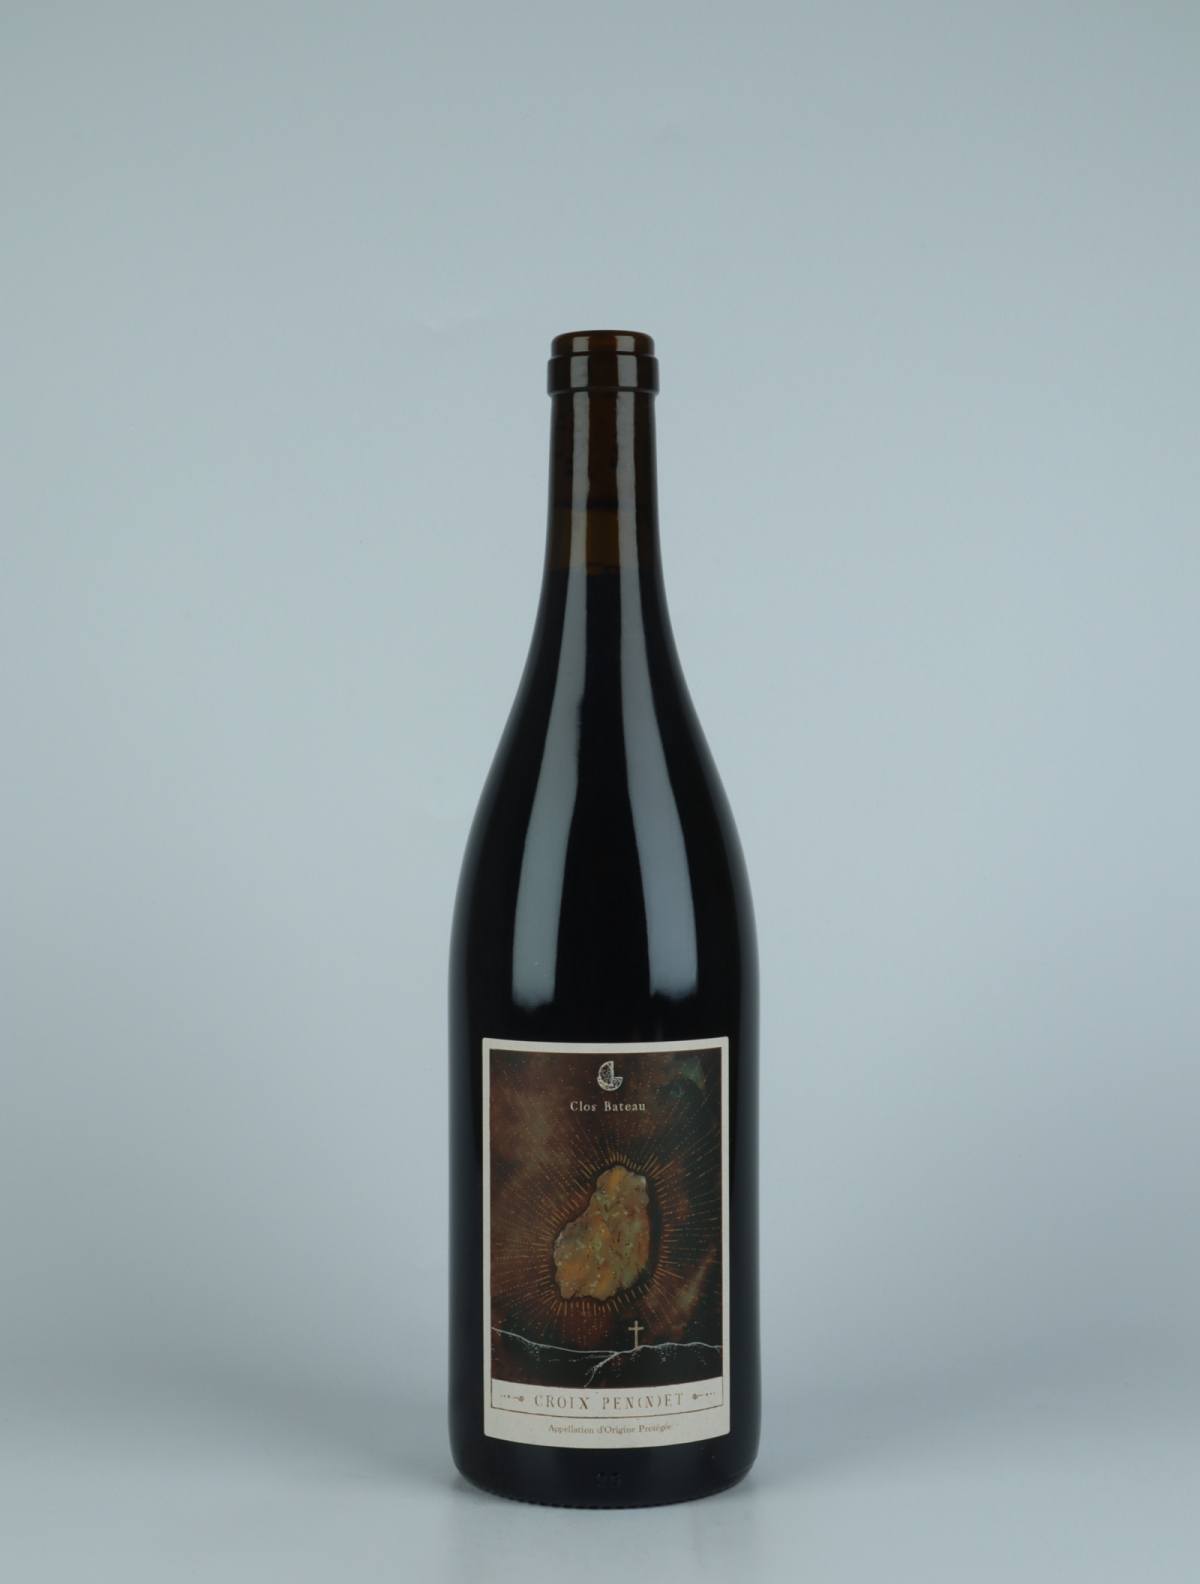 A bottle 2021 Croix Pennet Red wine from Clos Bateau, Beaujolais in France